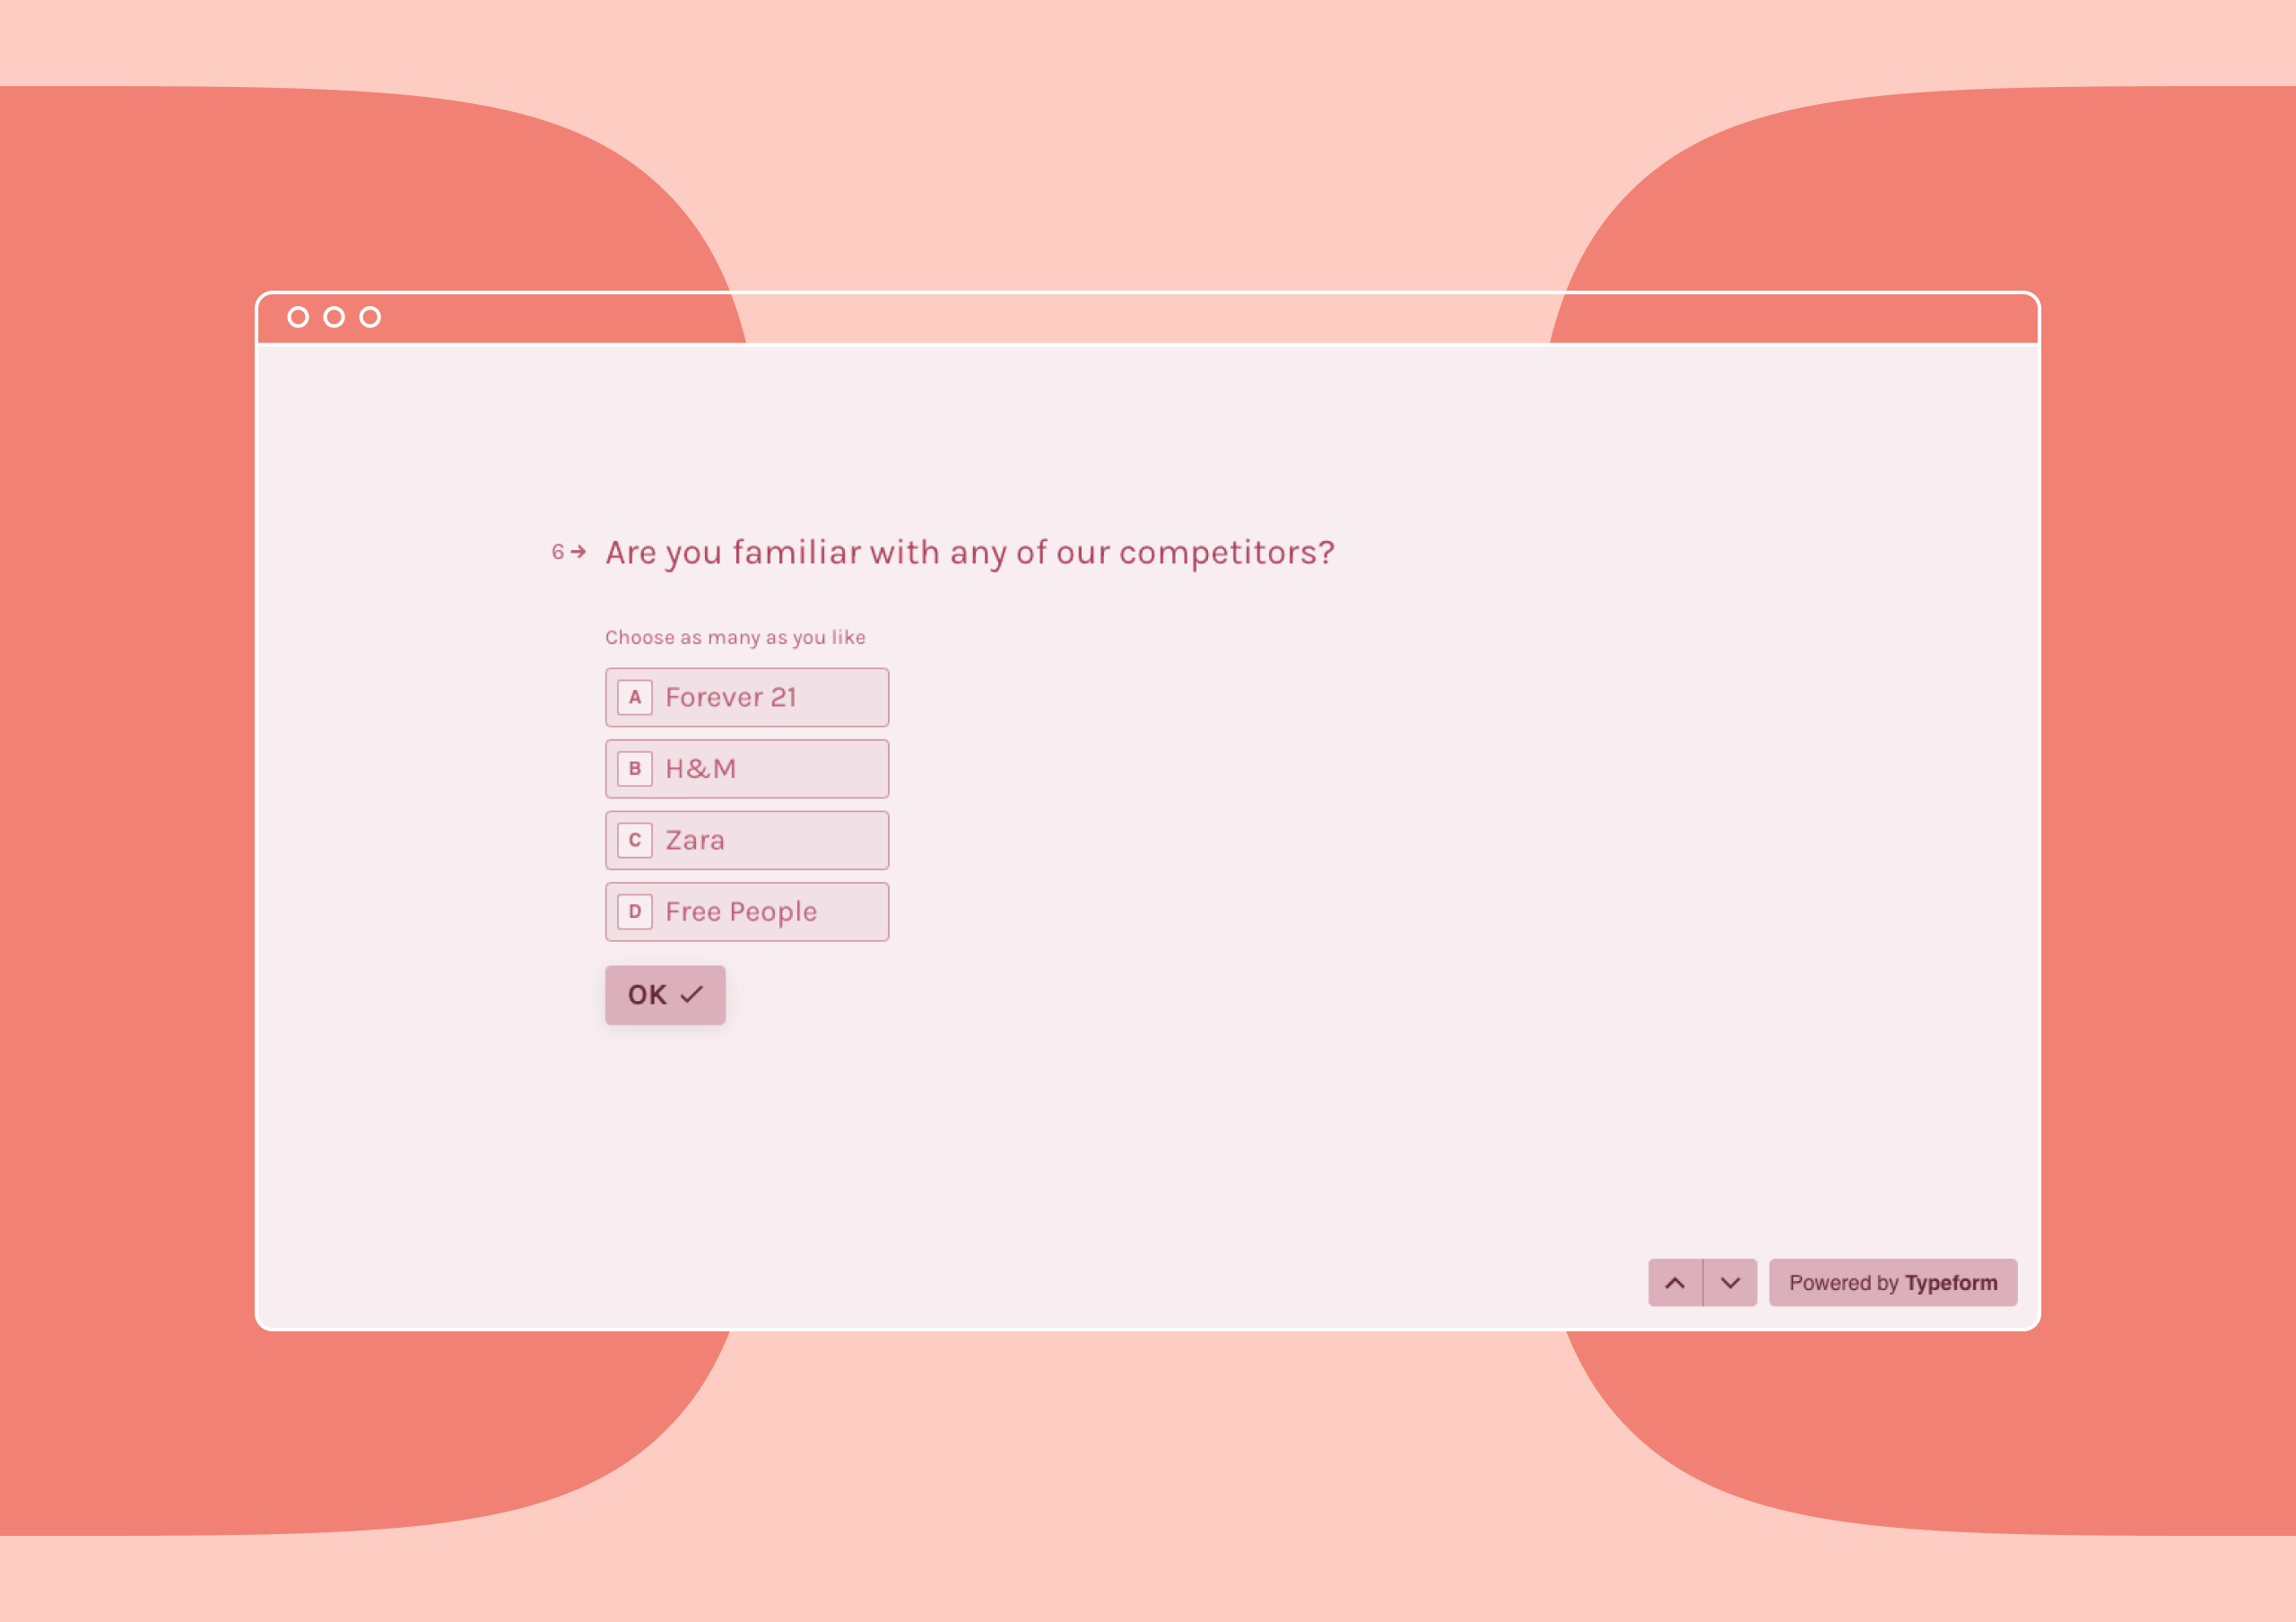 Screenshot of stylized survey question asking you if you’re familiar with any of a given list of fashion brands.